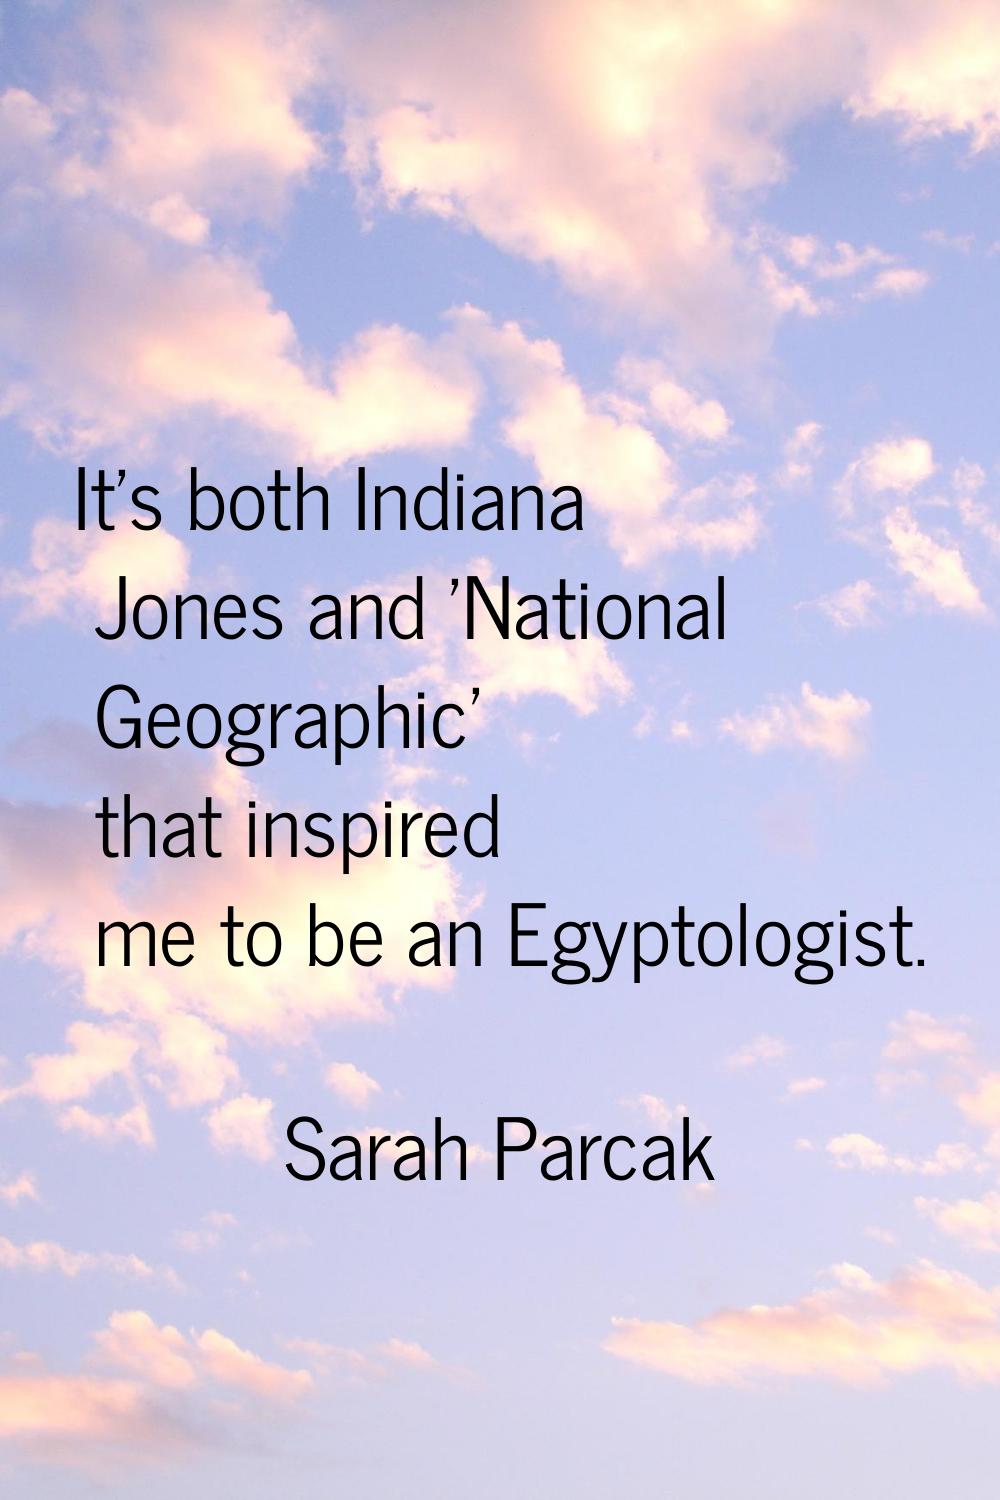 It's both Indiana Jones and 'National Geographic' that inspired me to be an Egyptologist.